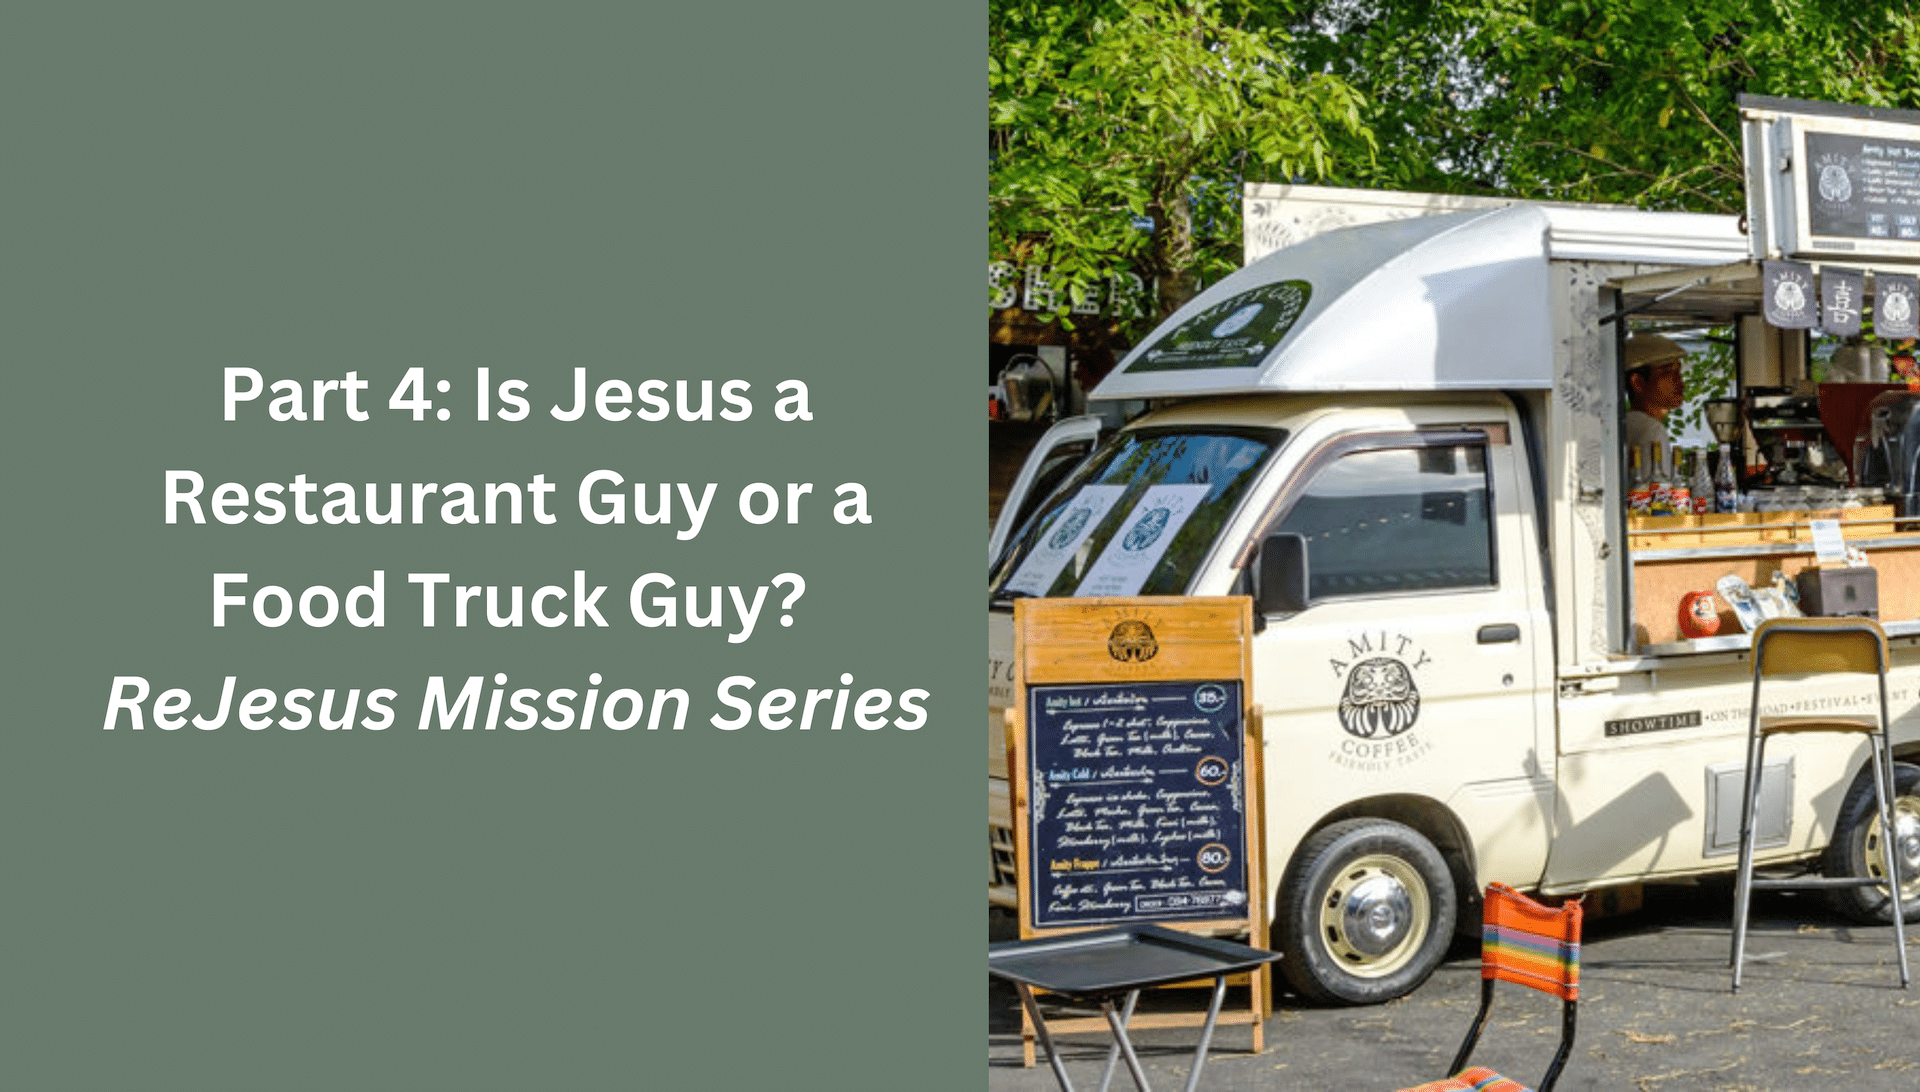 Part 4: Is Jesus a restaurant guy or a food truck guy?